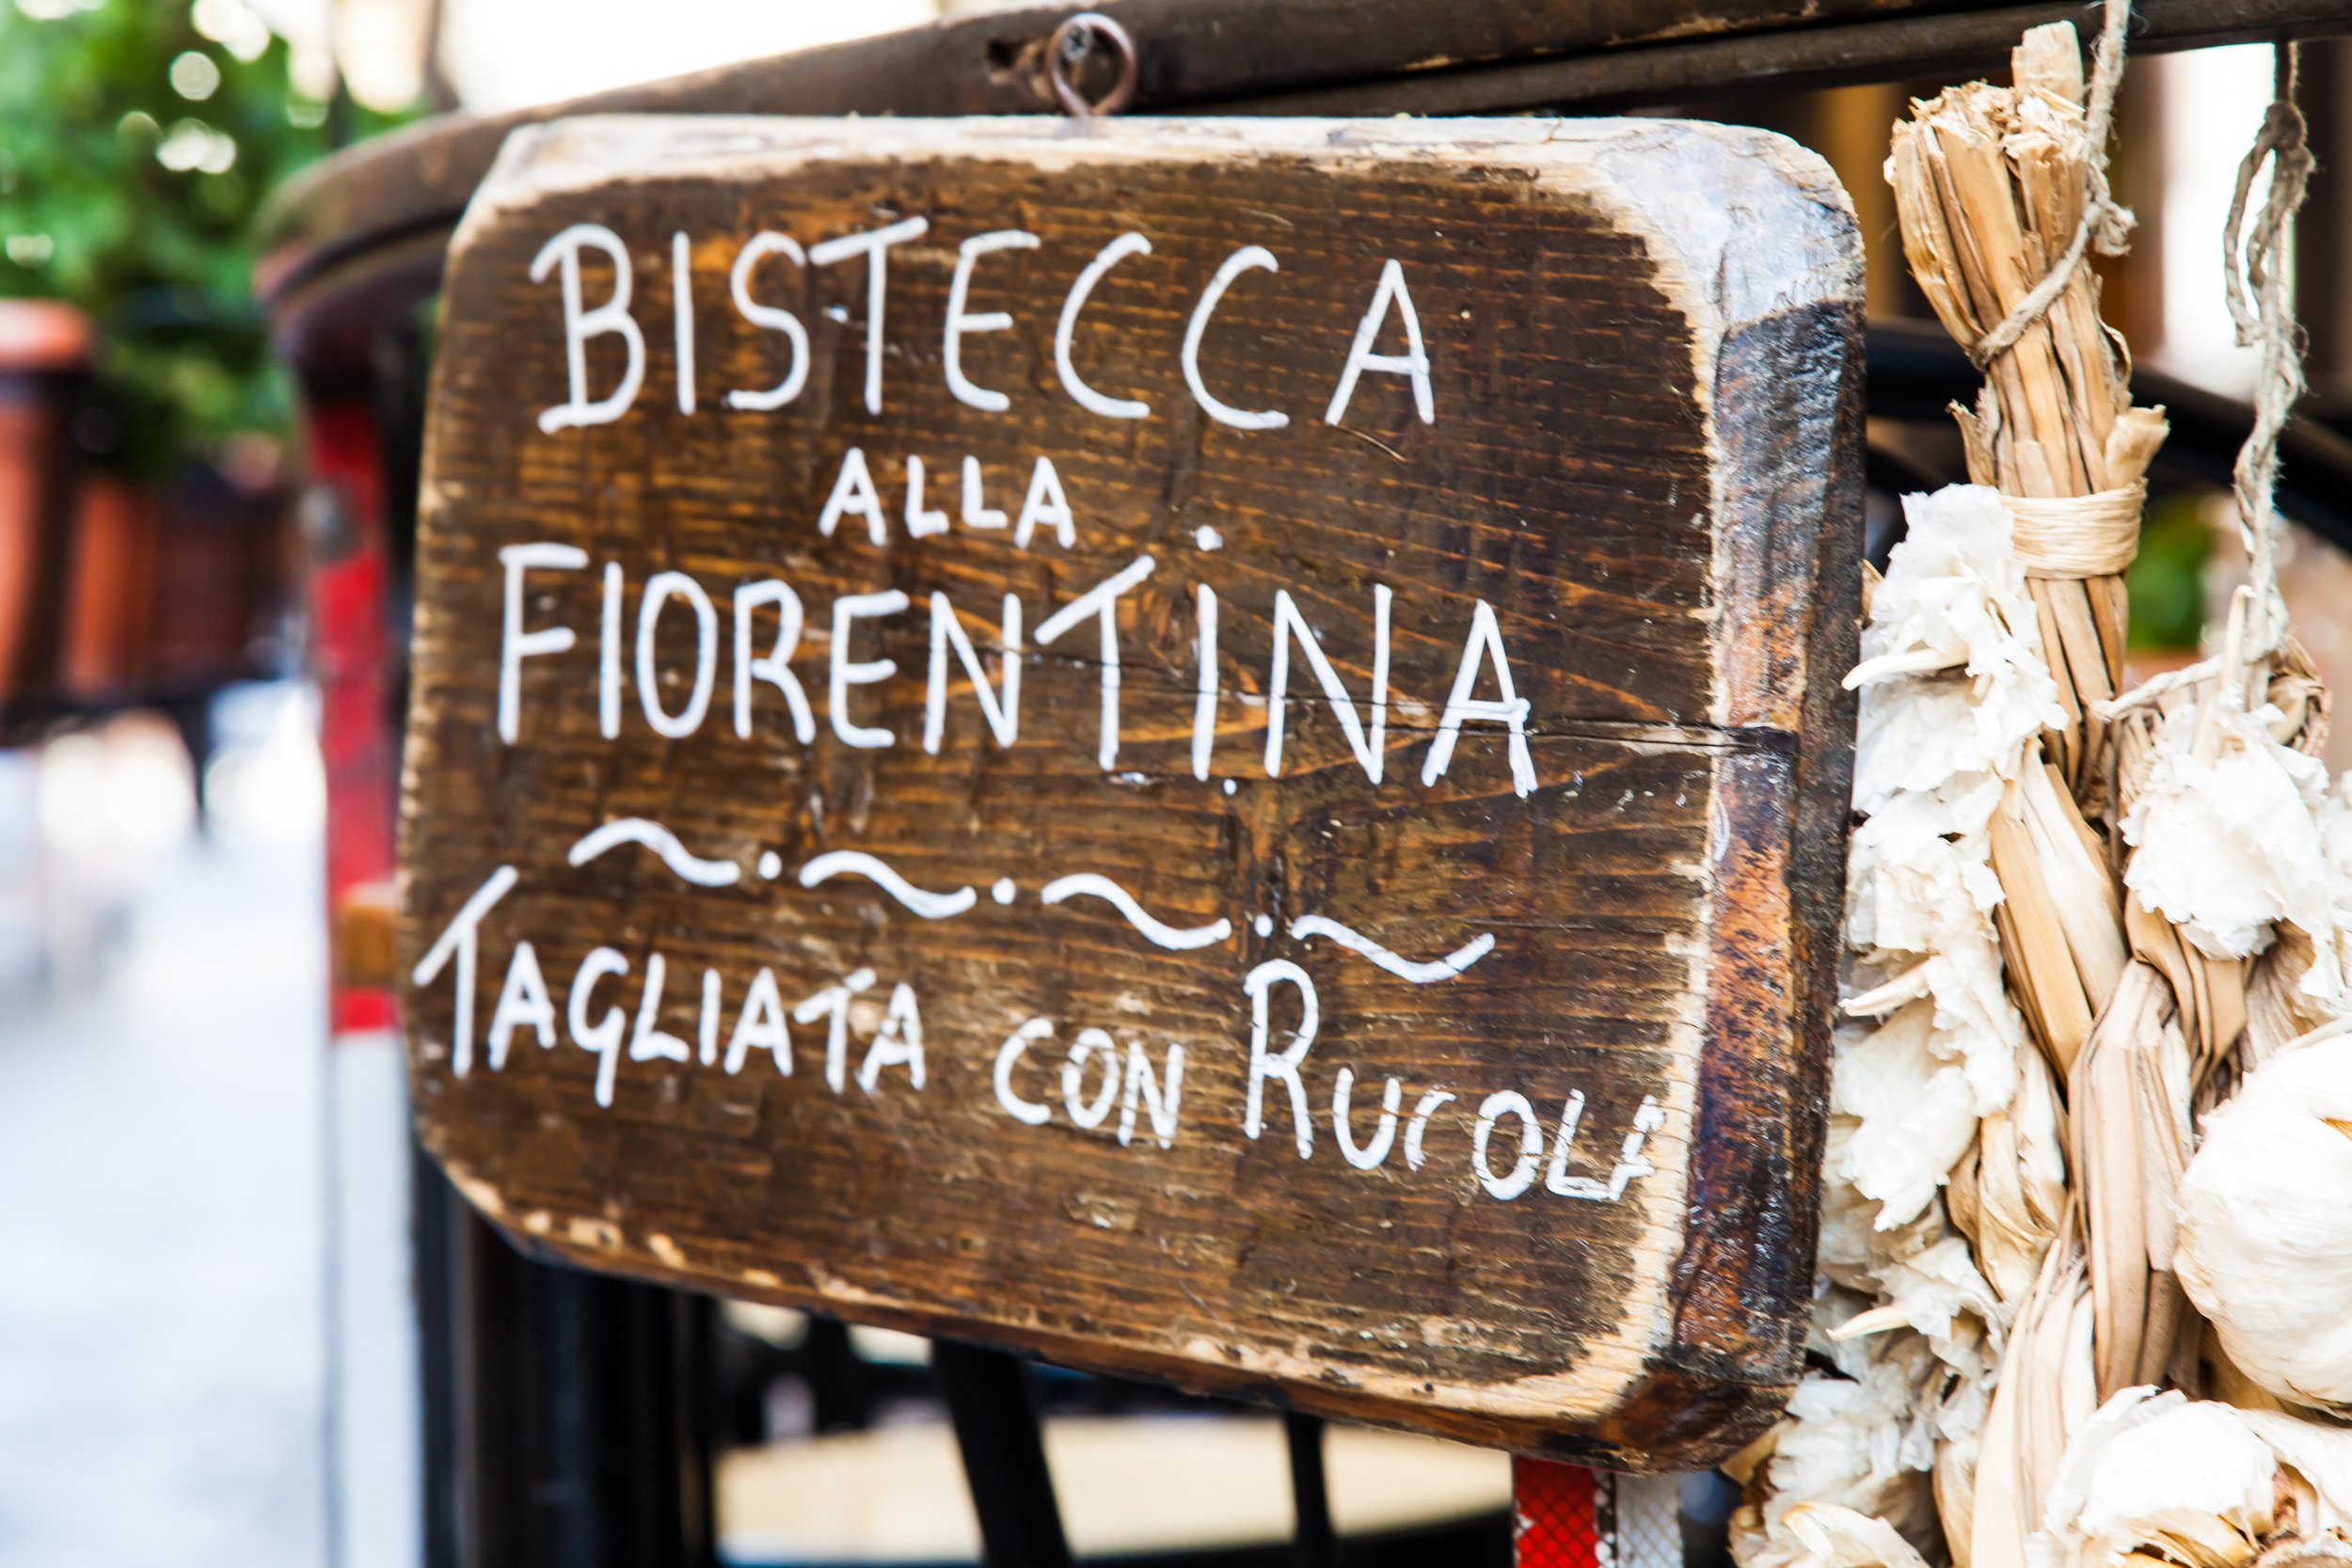 sign-made-wood-with-bistecca-alla-fiorentina-florence-steak-words.jpg